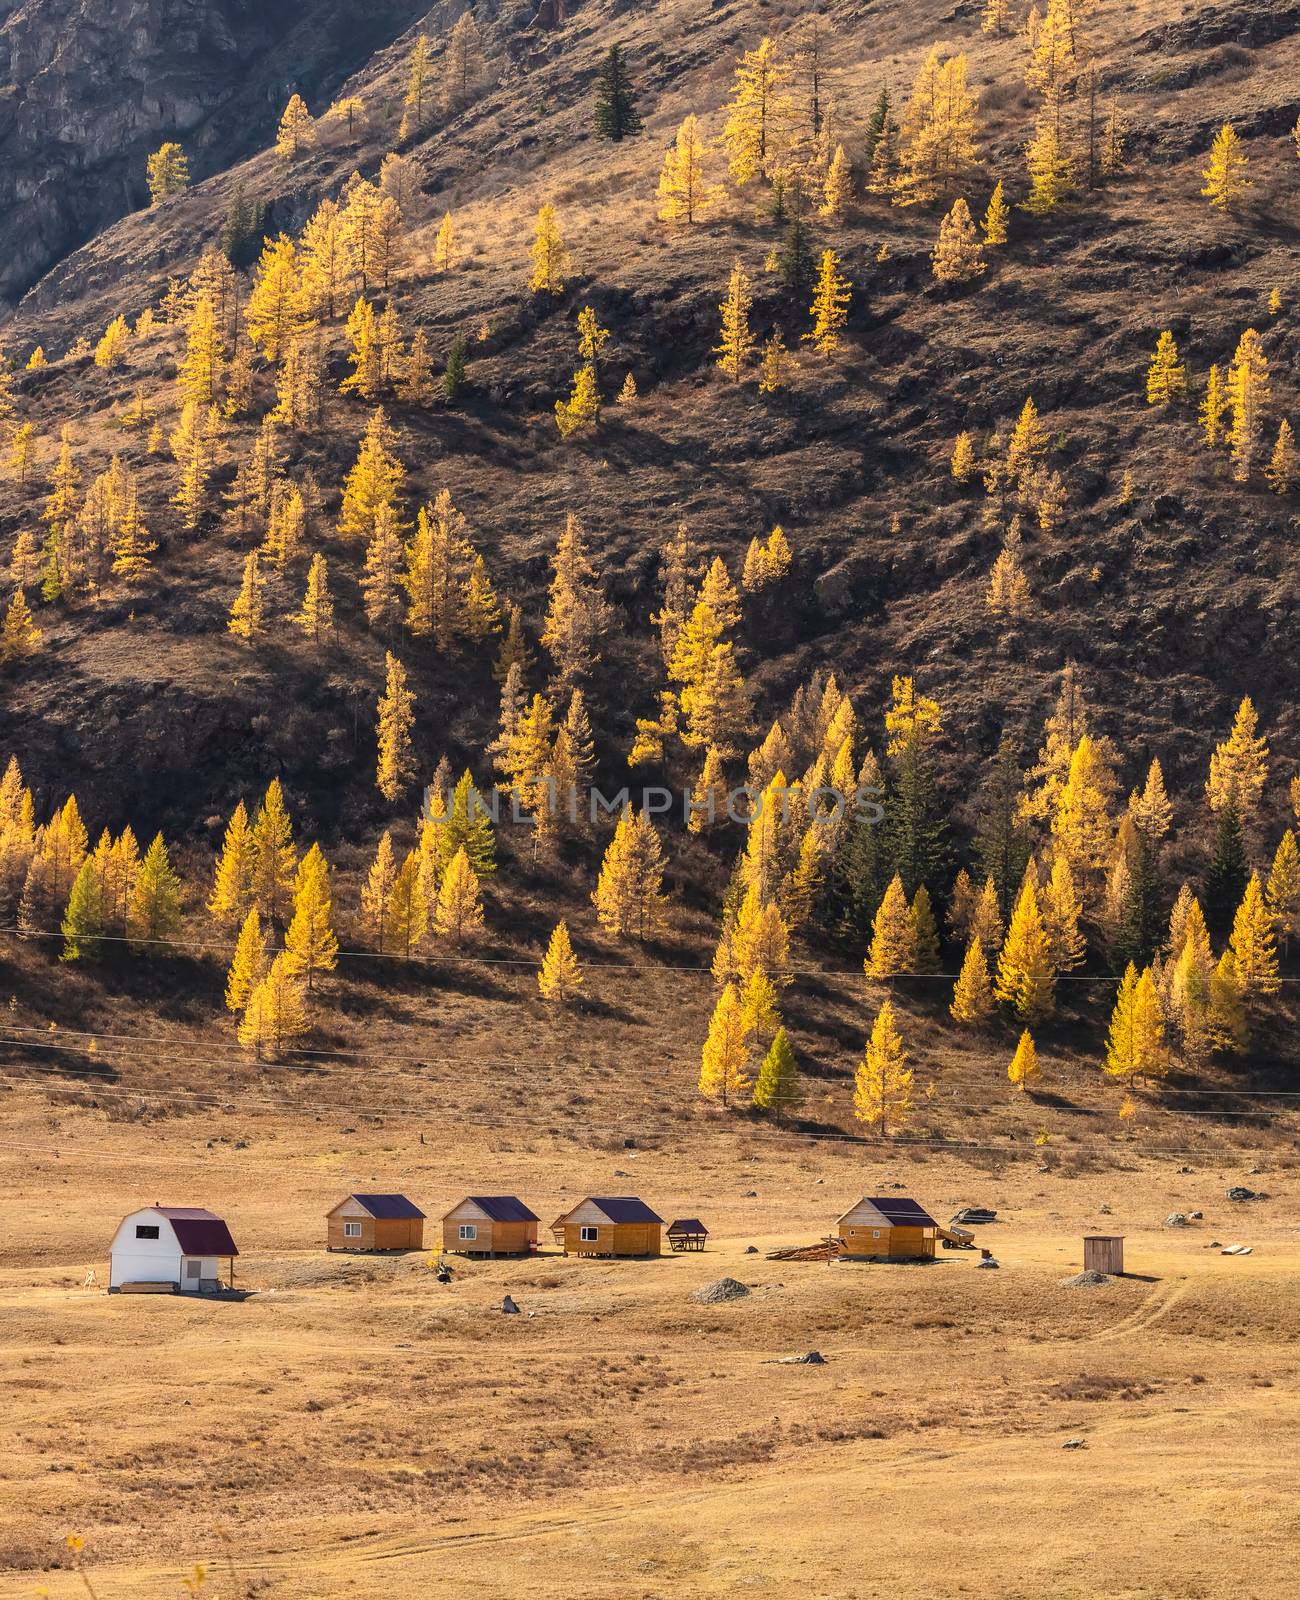 Altai mountains. Beautiful highland autumn panoramic landscape. Portrait size. Wooden huts in the foreground. Mountain slopes covered with golden trees in the background. Russia. Siberia by DamantisZ